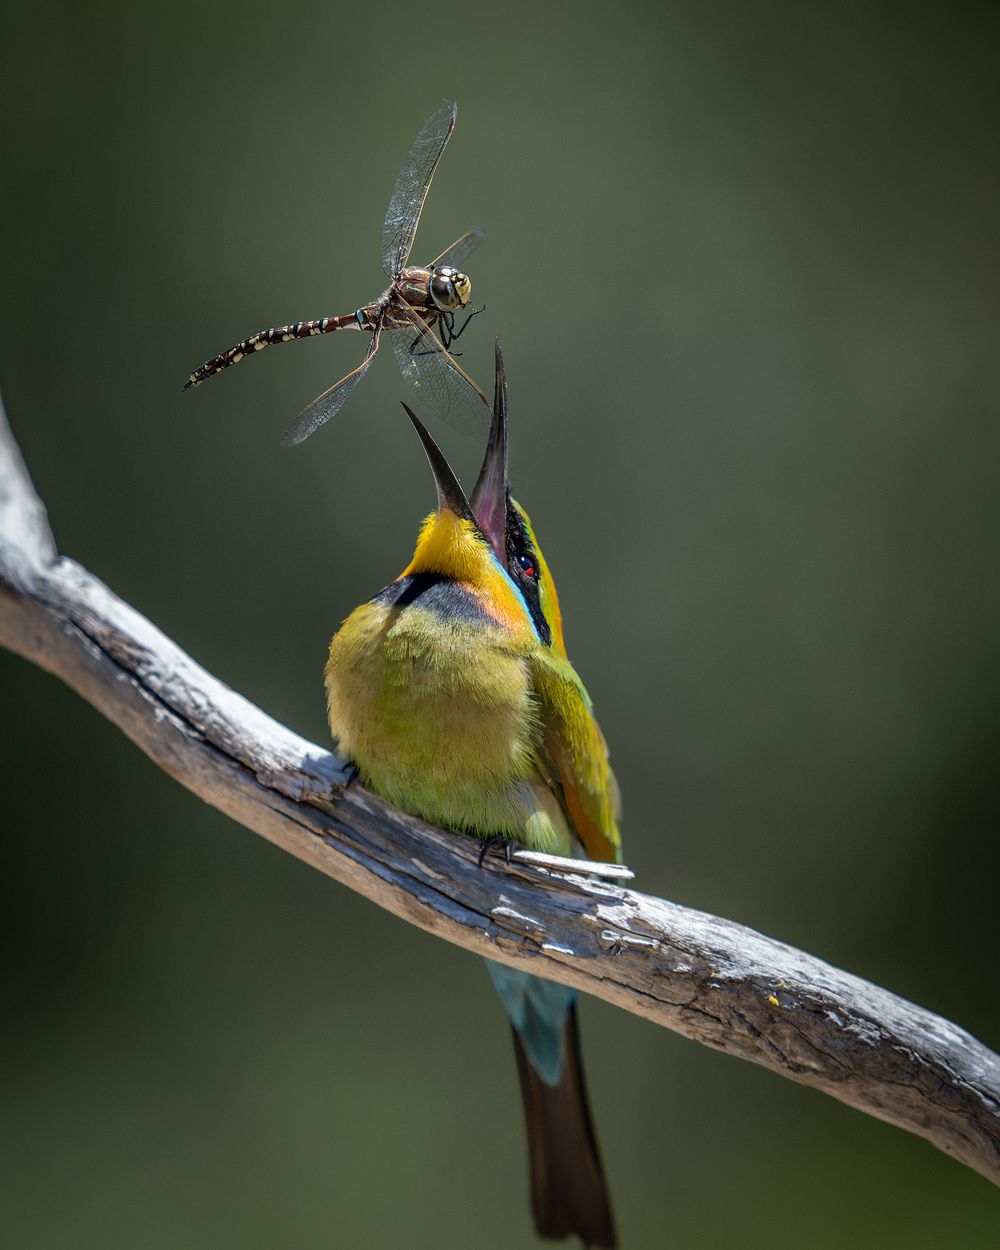 A Rainbow Bee-eater prepares to feast on a dragonfly after repeatedly slamming the insect against its perch to stun and subdue it. 
This photograph captures the unfortunate dragonfly's final moments, just before it is swallowed whole, wings and all.